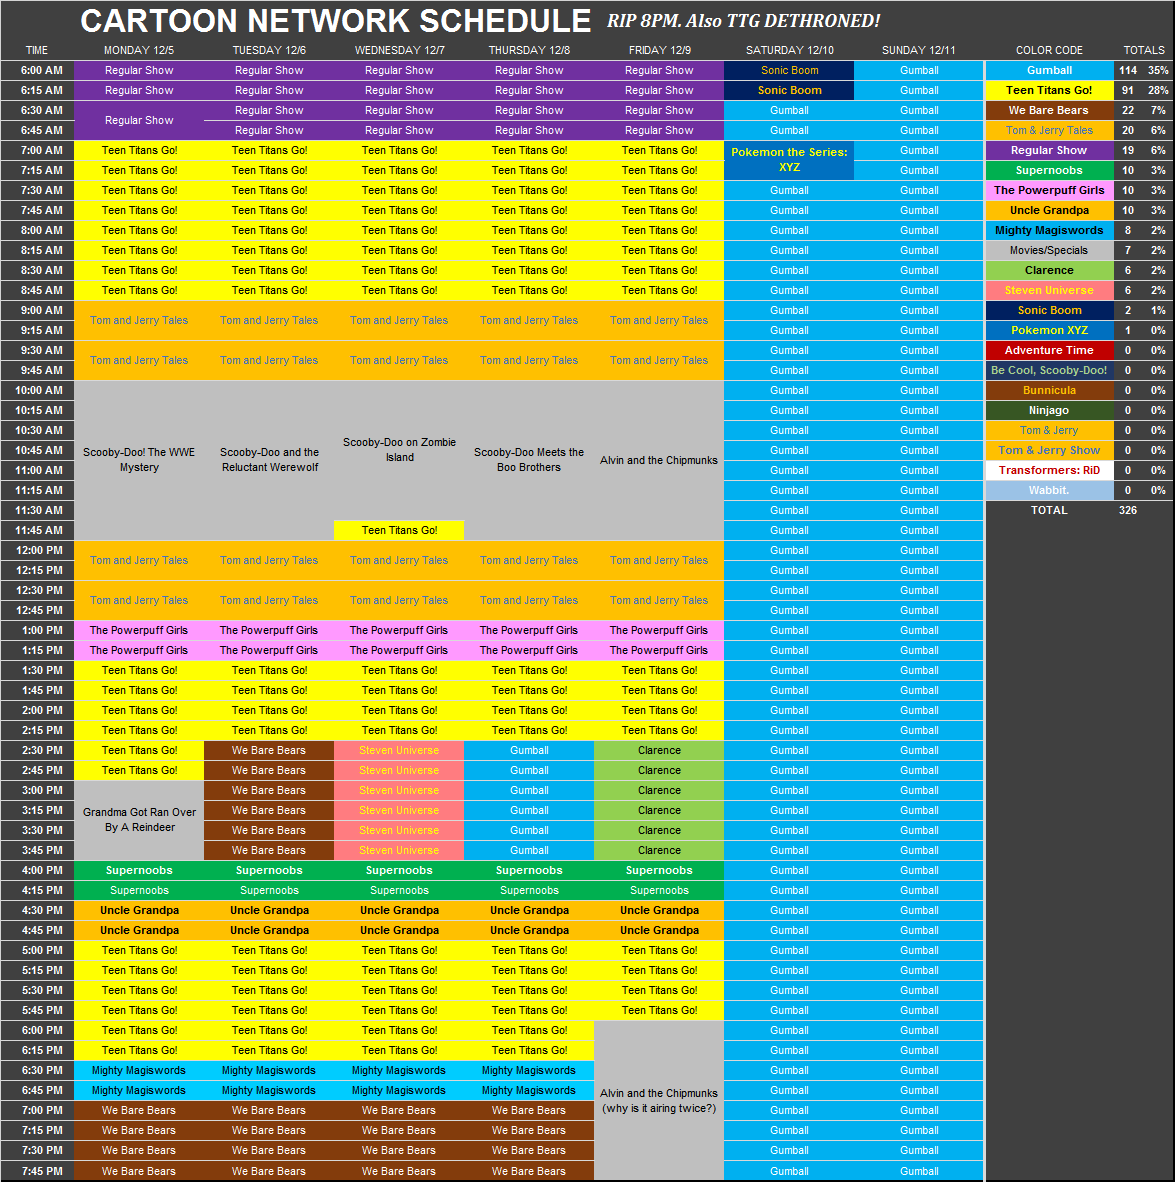 BoogsterSU2 — This was the Cartoon Network schedule from...